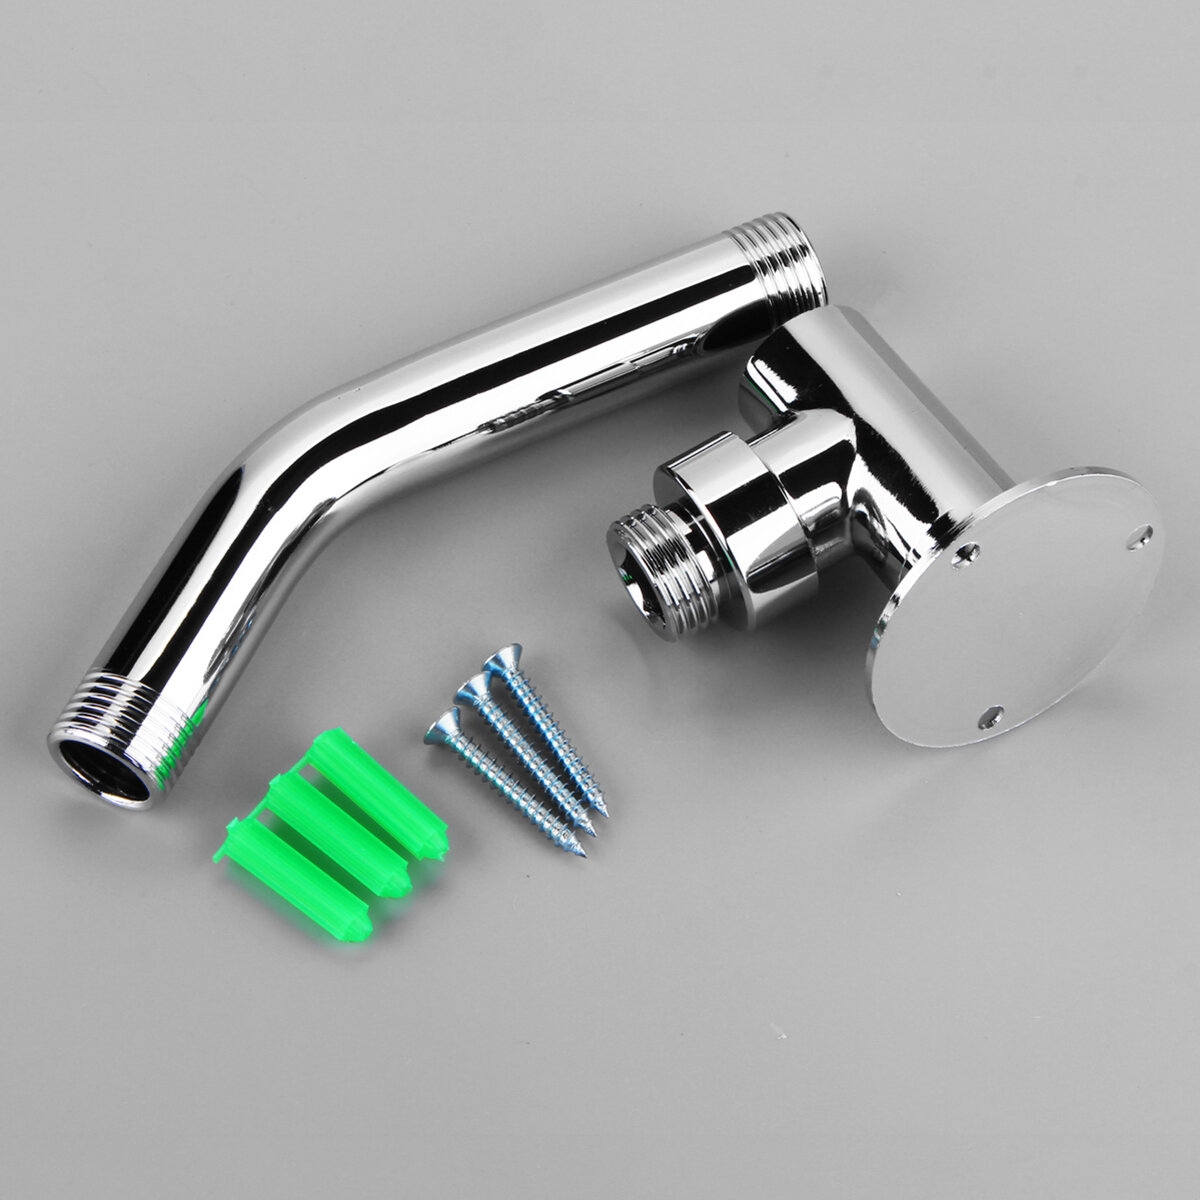 13.2cm Wall Mounted Shower Extension Arm Pipe Bottom Entry for Rain Shower Head